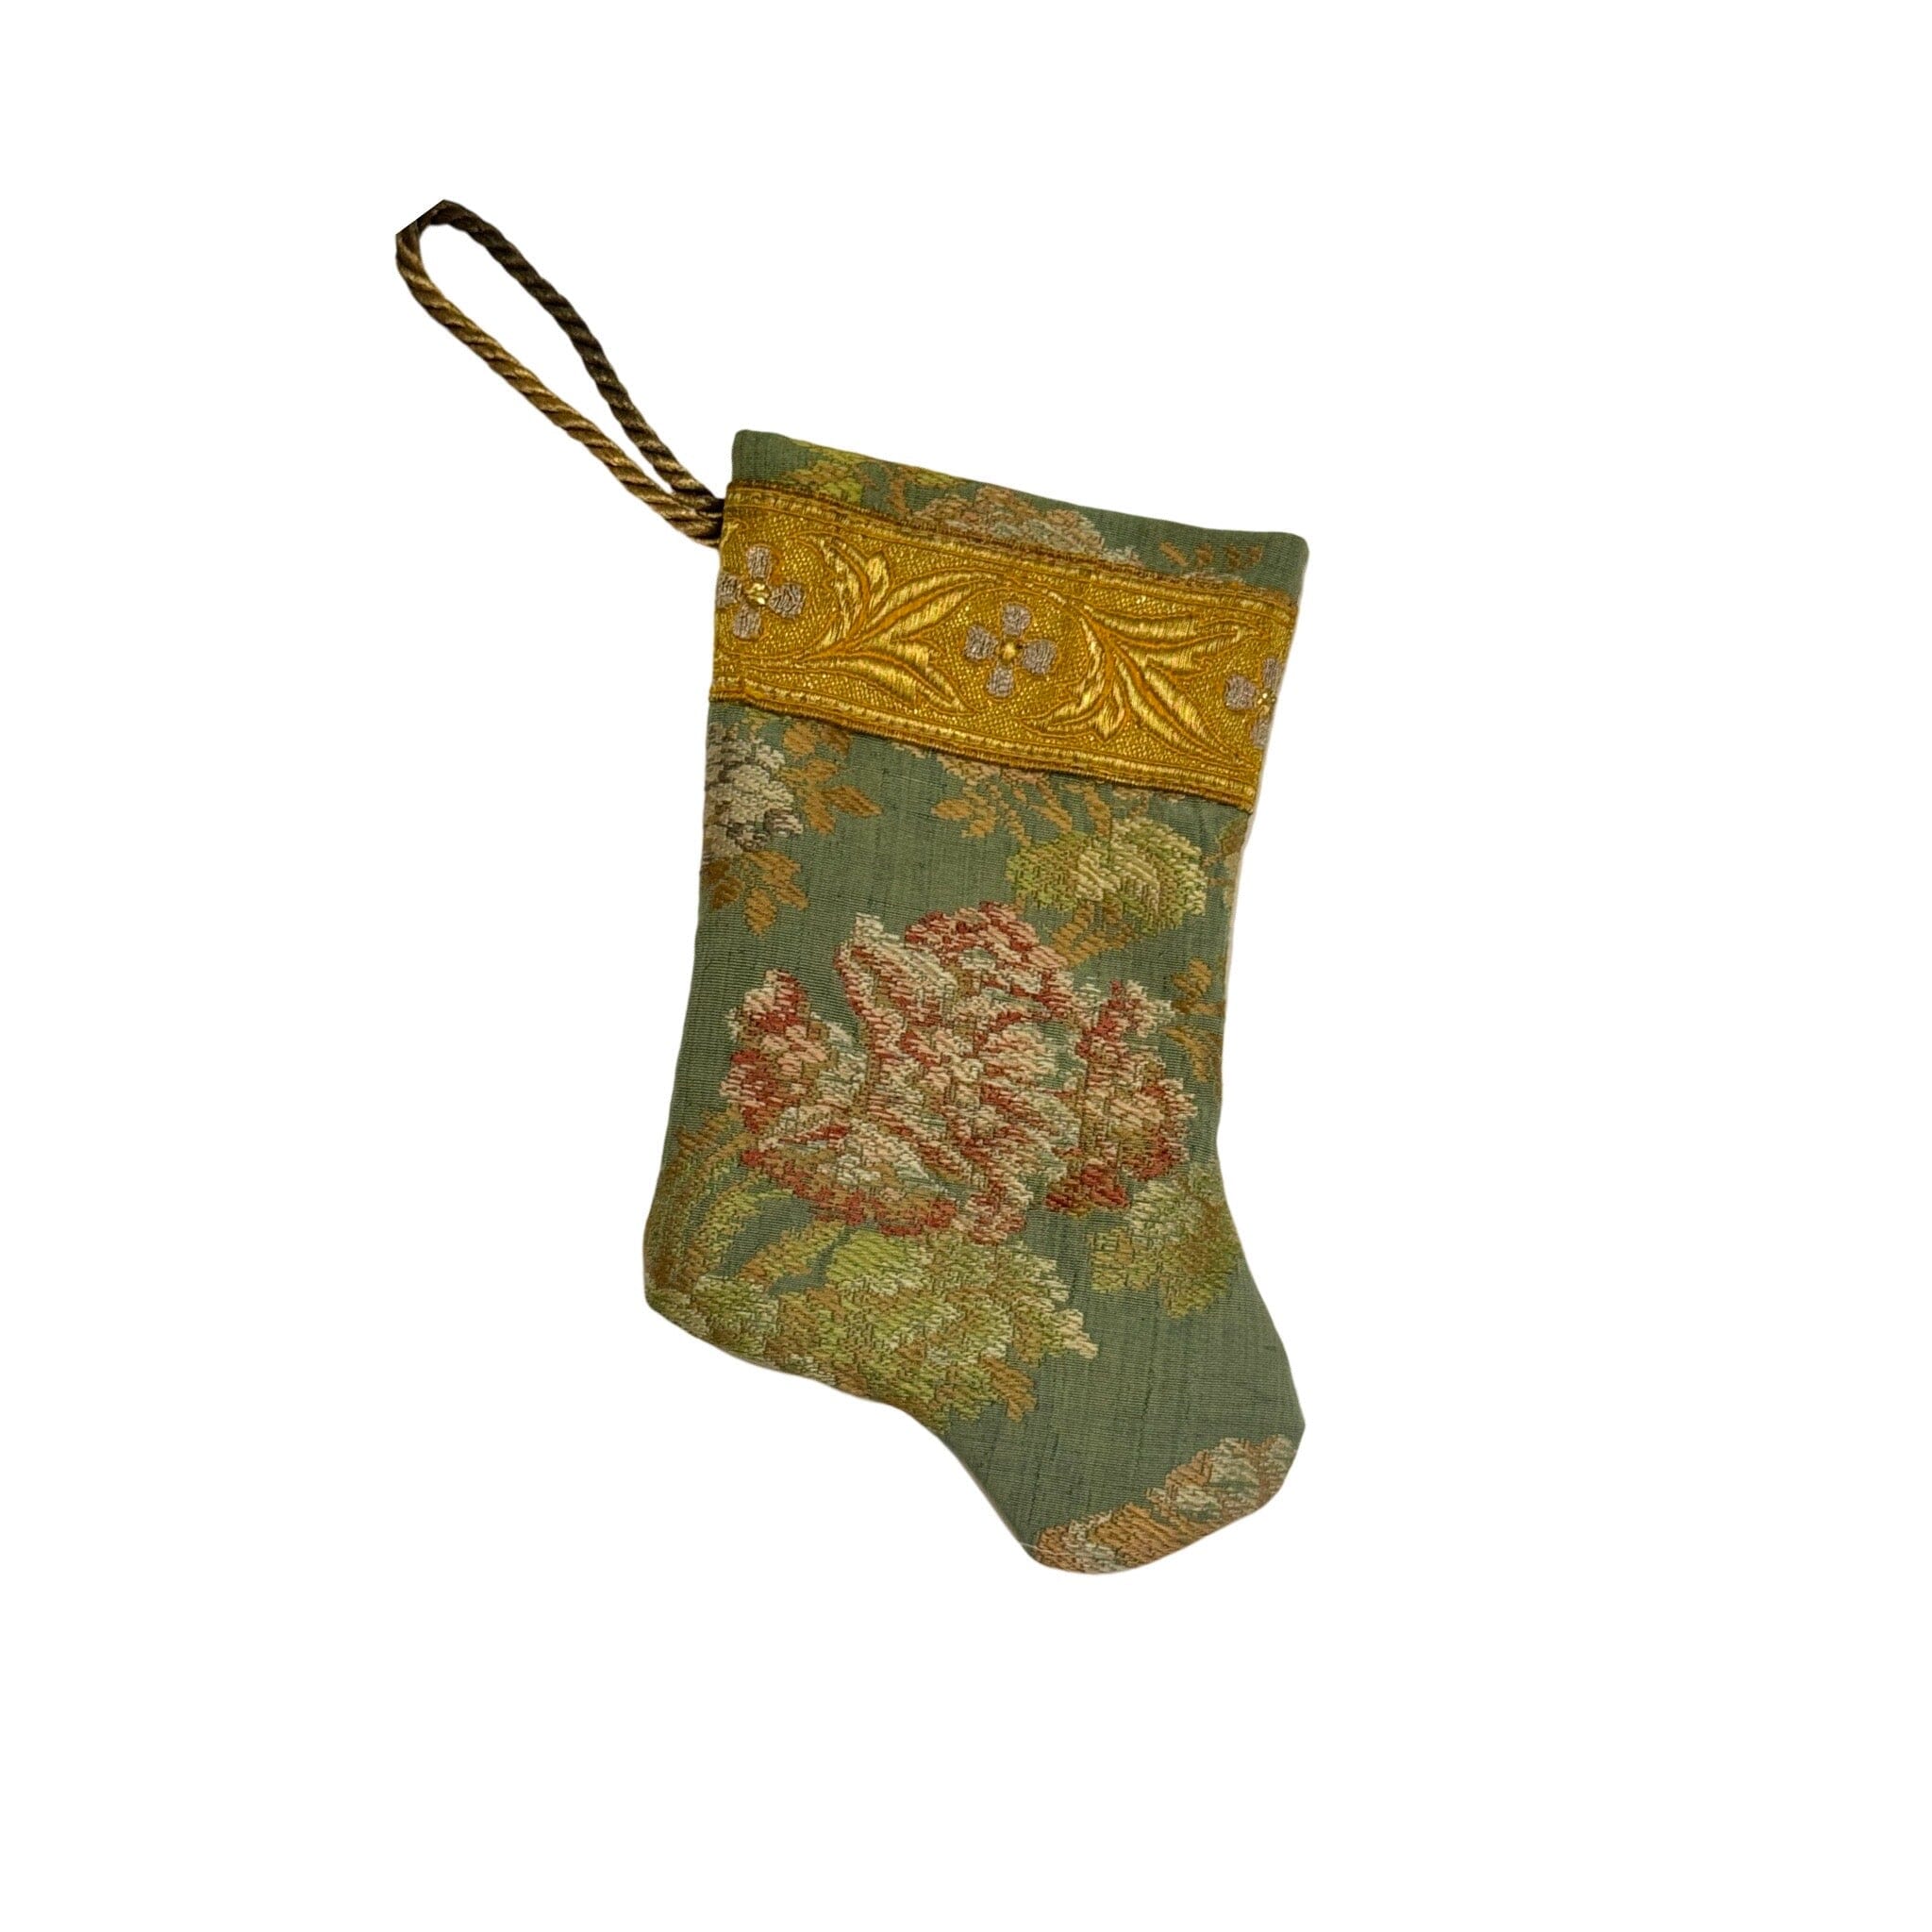 Handmade Mini Stocking Made From Vintage Fabric and Trims- Green Floral Ornament B. Viz Design J 